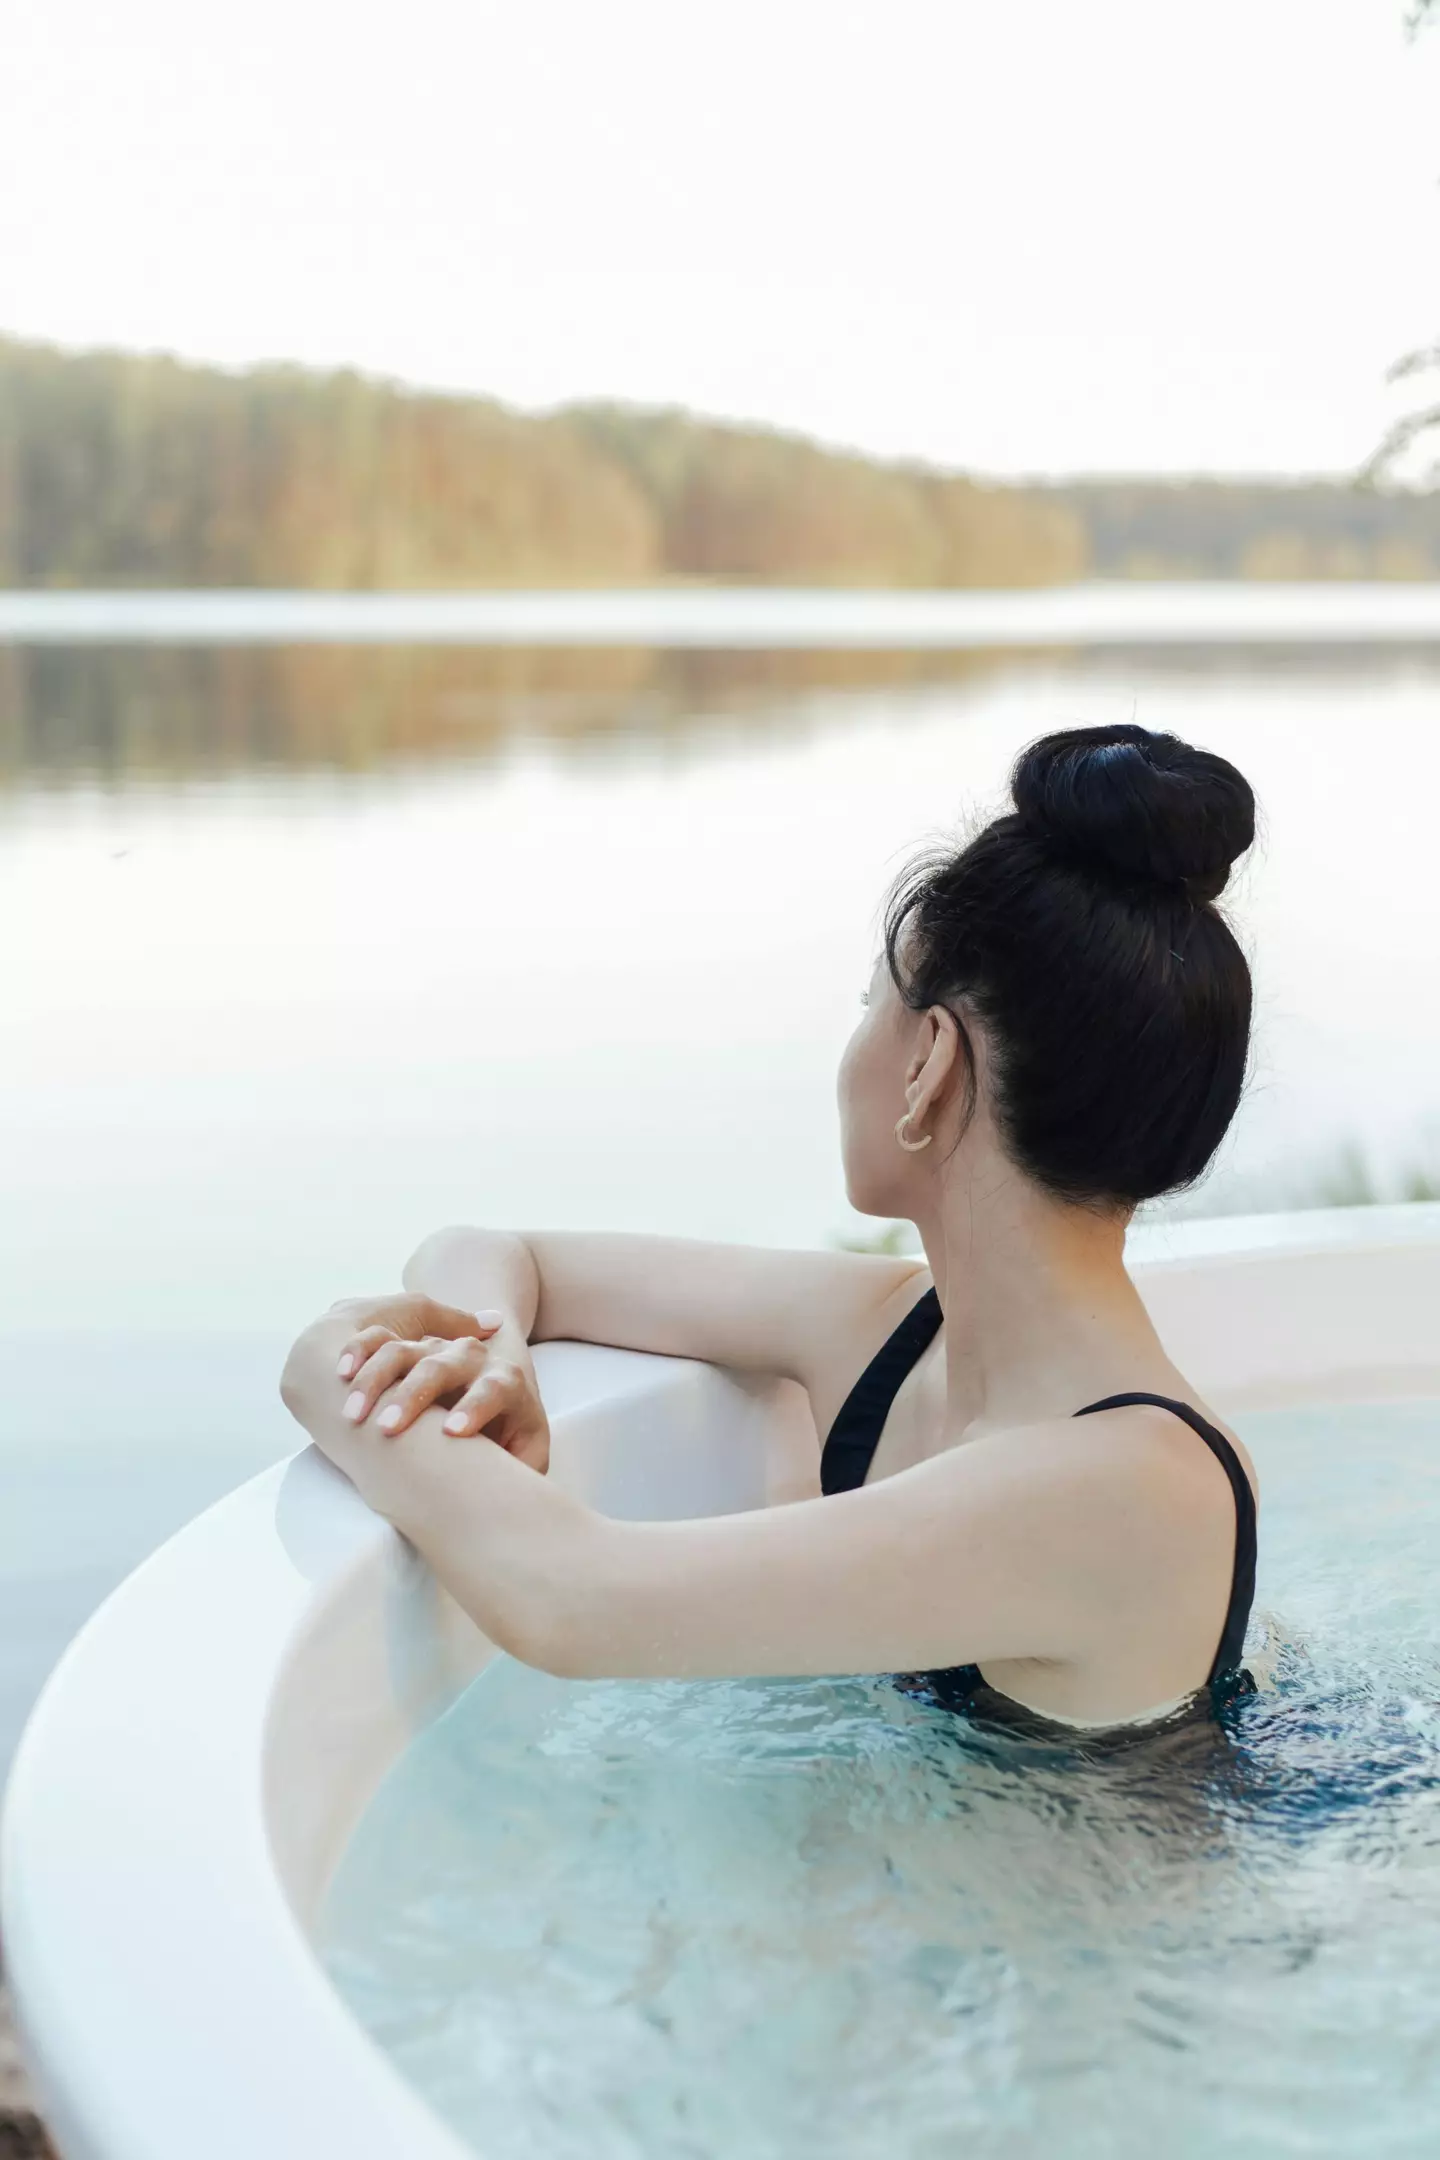 A hot tub doesn't have to be a dream, it could be a reality in your own backyard.